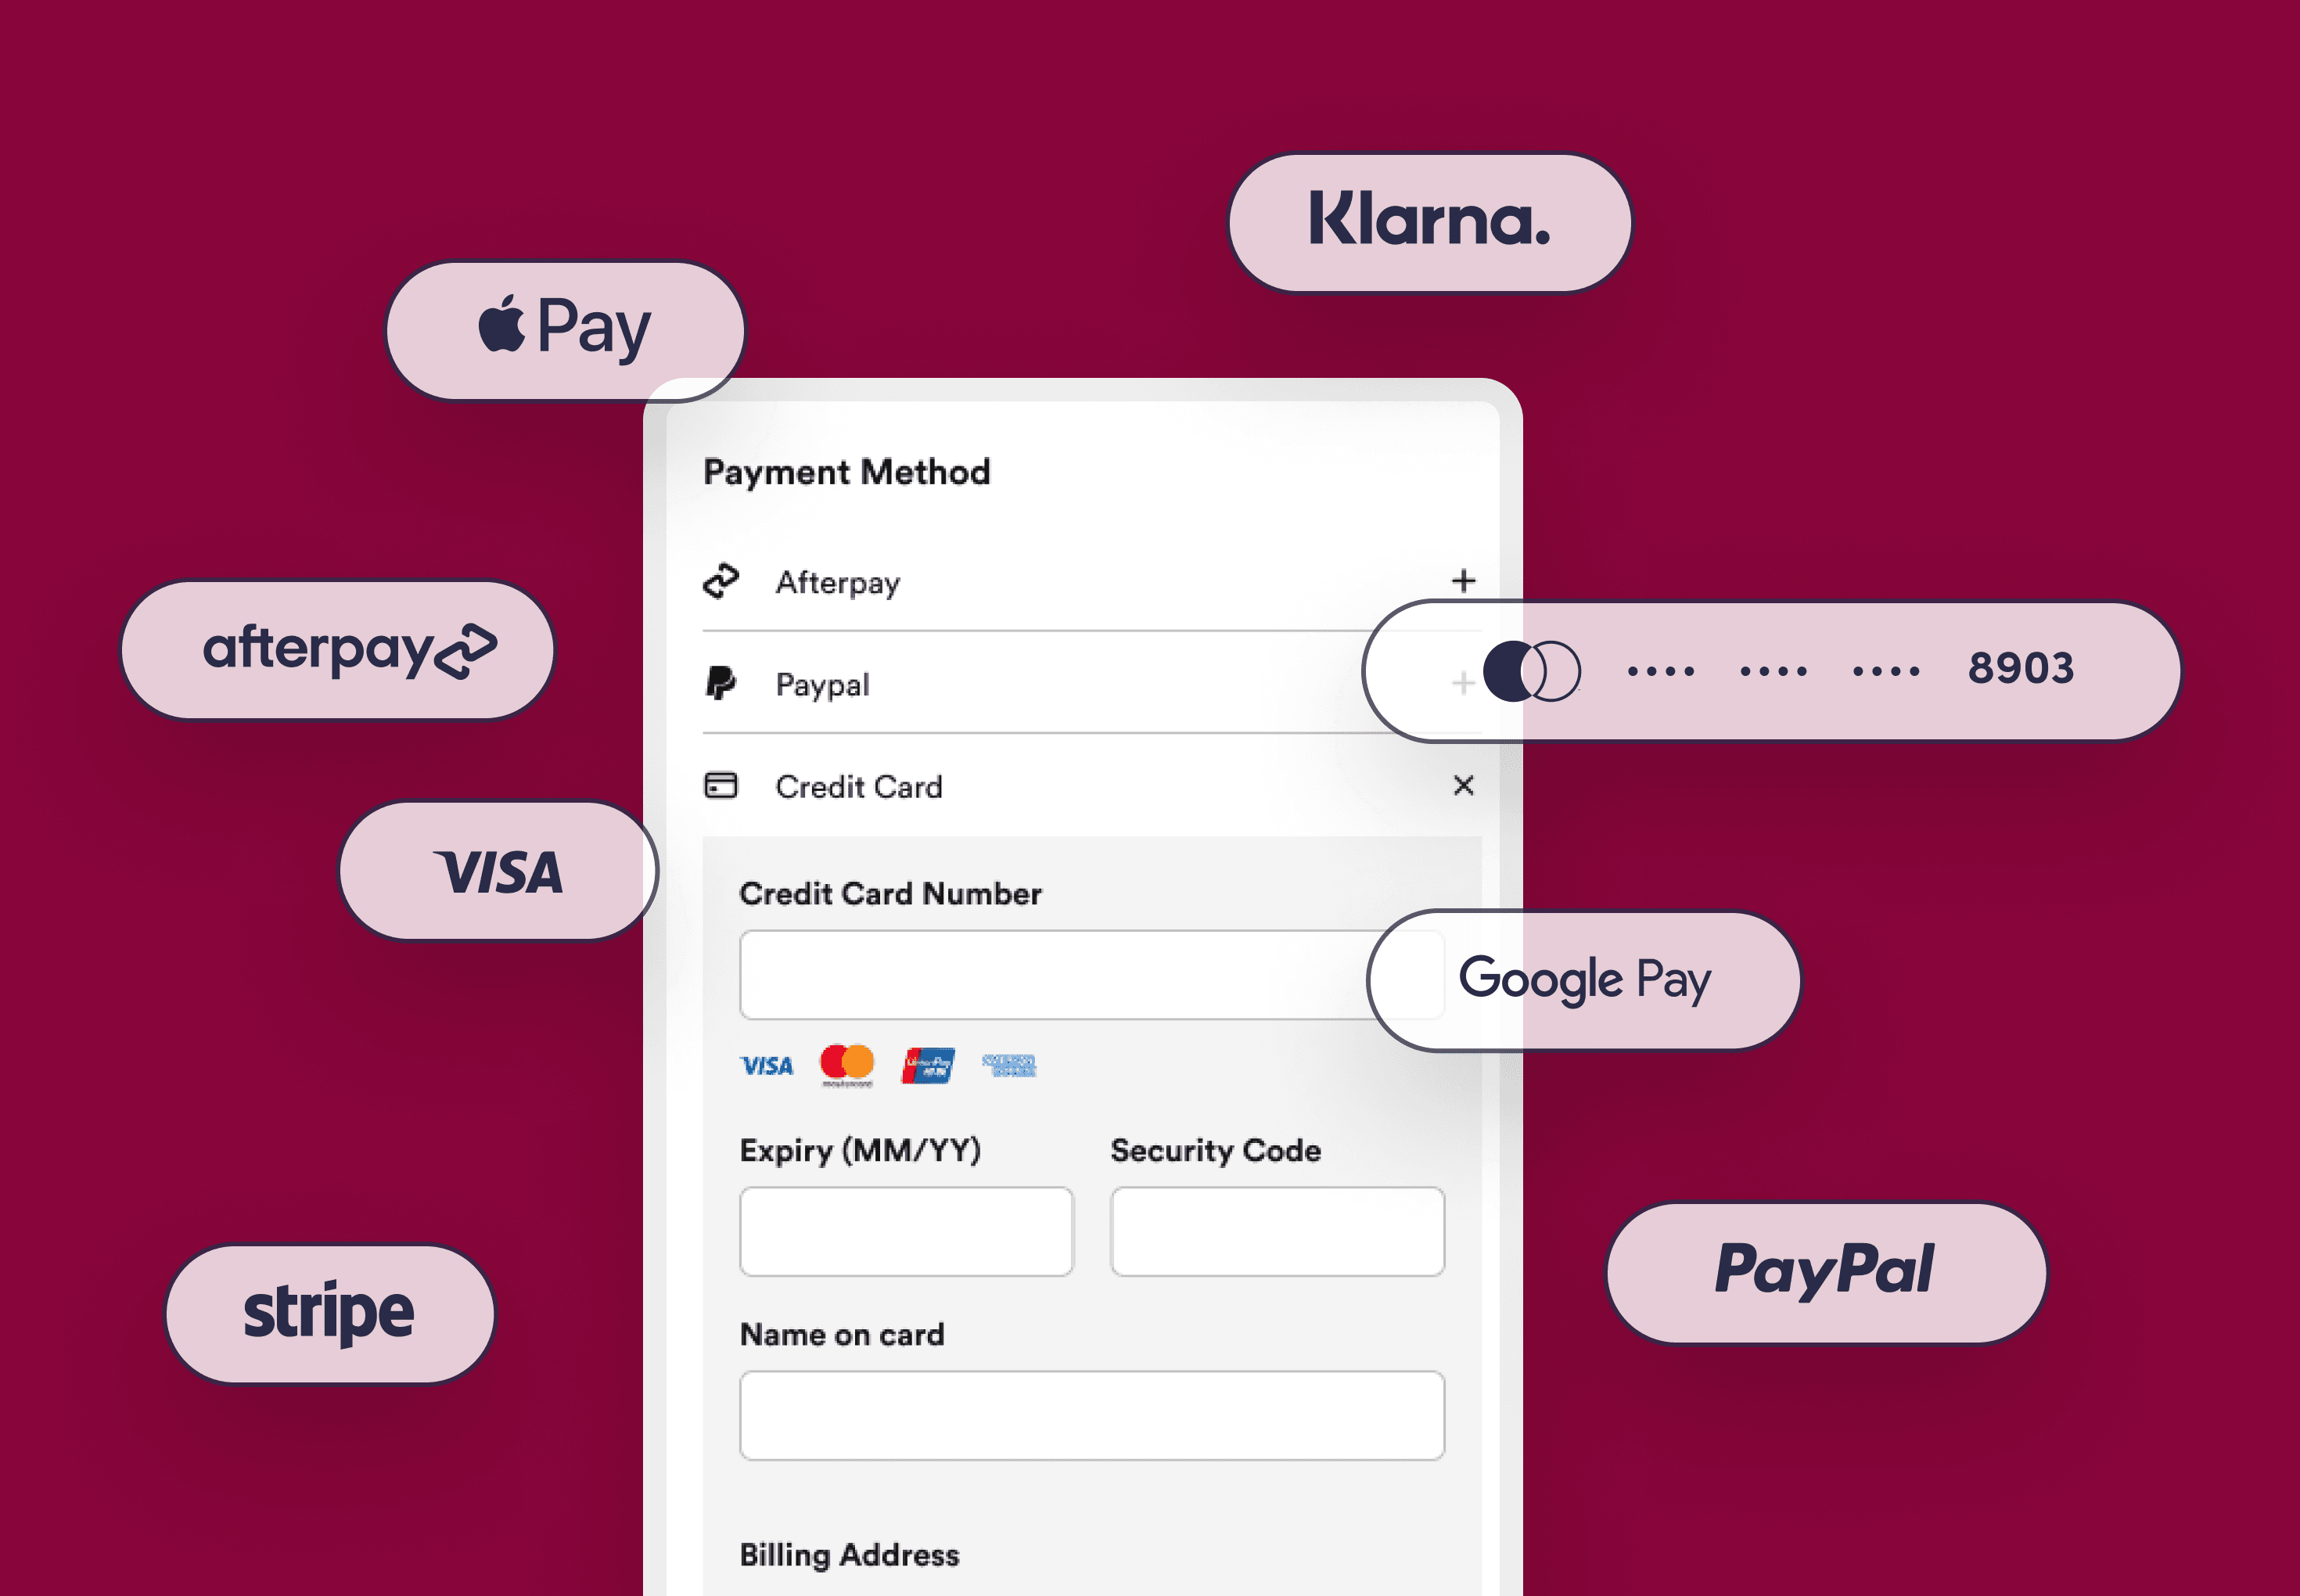 Screenshots of Bold checkout with payment options including Apple Pay, Klarna, Afterpay, Visa, Stripe, PayPal, Google Pay, and Mastercard.